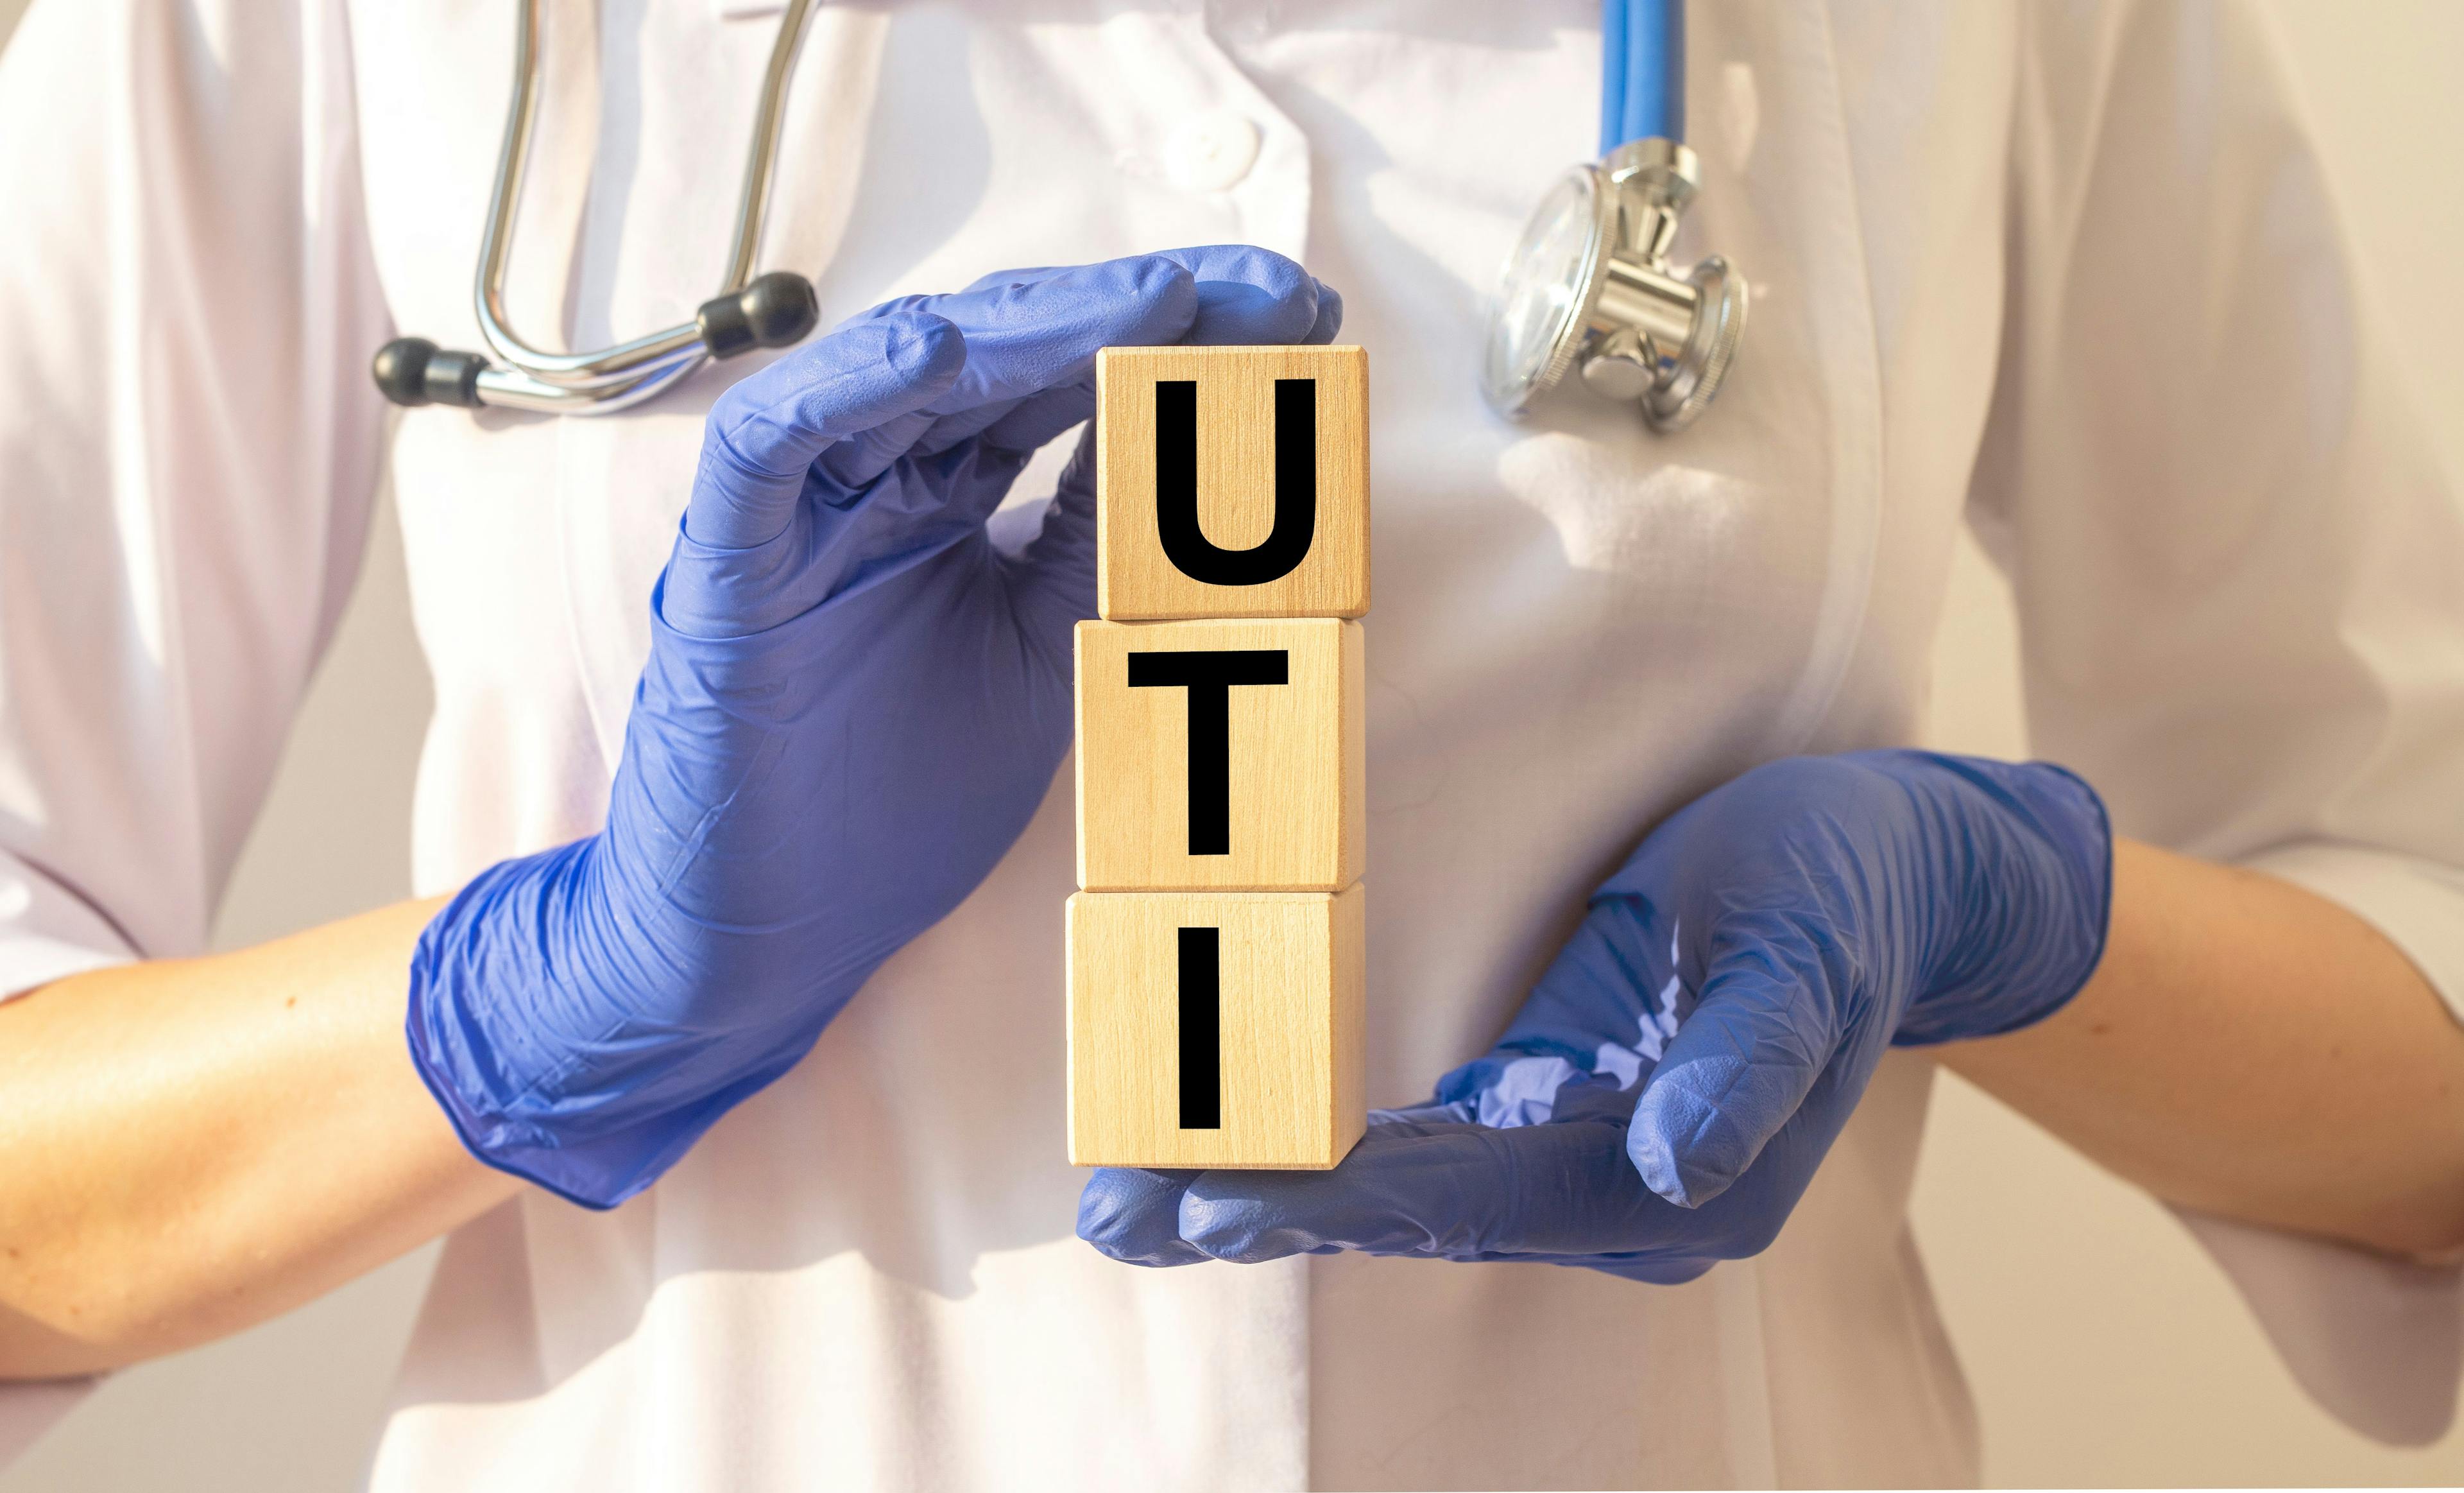 Word uti concept, urinary tract infection inscription on cubes in doctor hands | Image Credit: valiantsin - stock.adobe.com